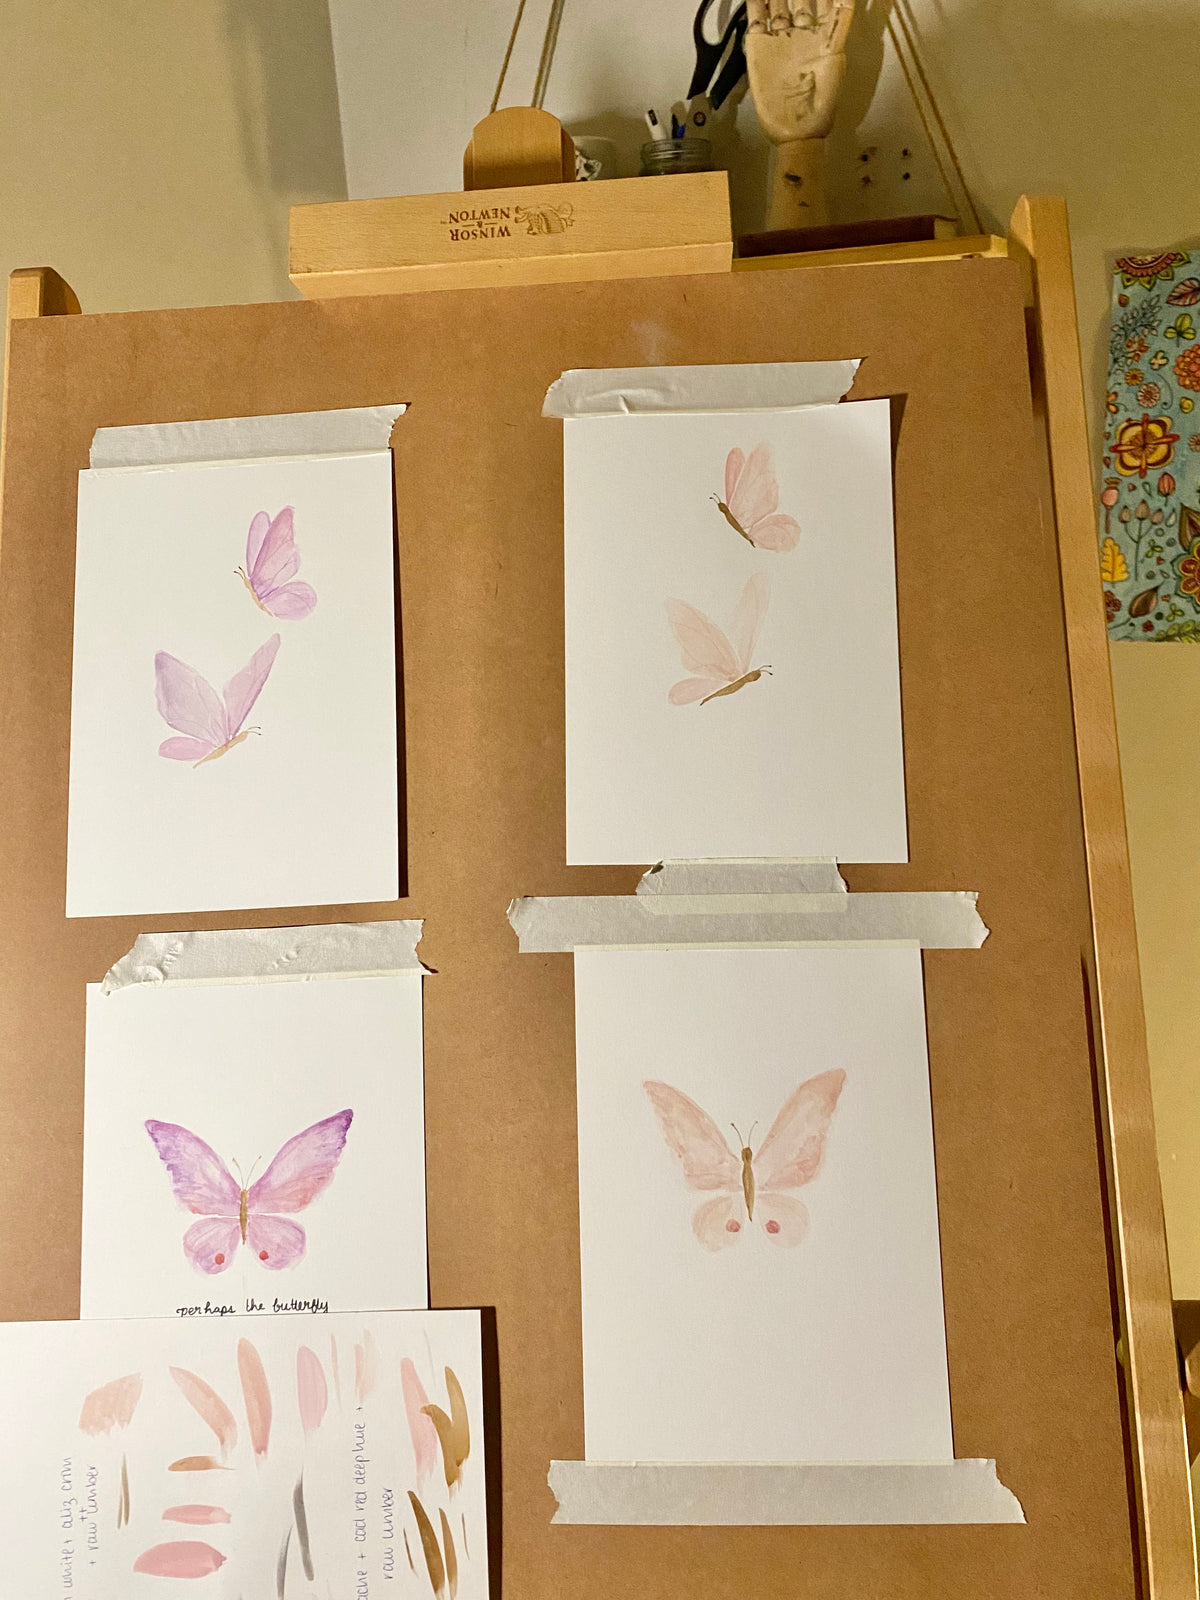 13 Delicate Watercolour Butterflies - Removable Fabric Wall Stickers - lovefrankieart